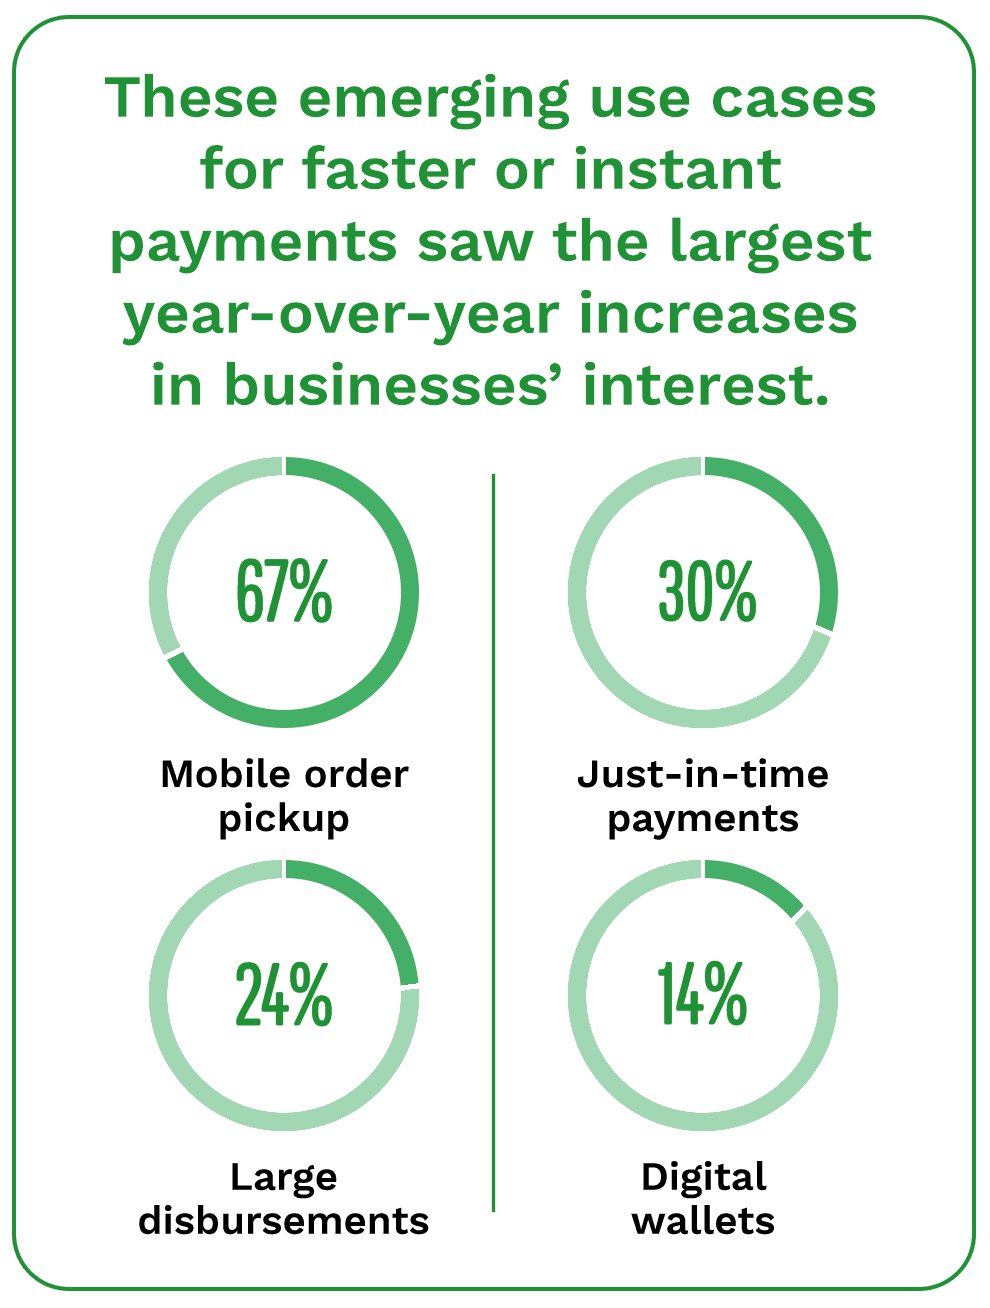 Mobile order pickup, just-in-time payments, large disbursements and digital wallets are emerging use cases for faster or instant payments that saw the largest YoY increase in business interest